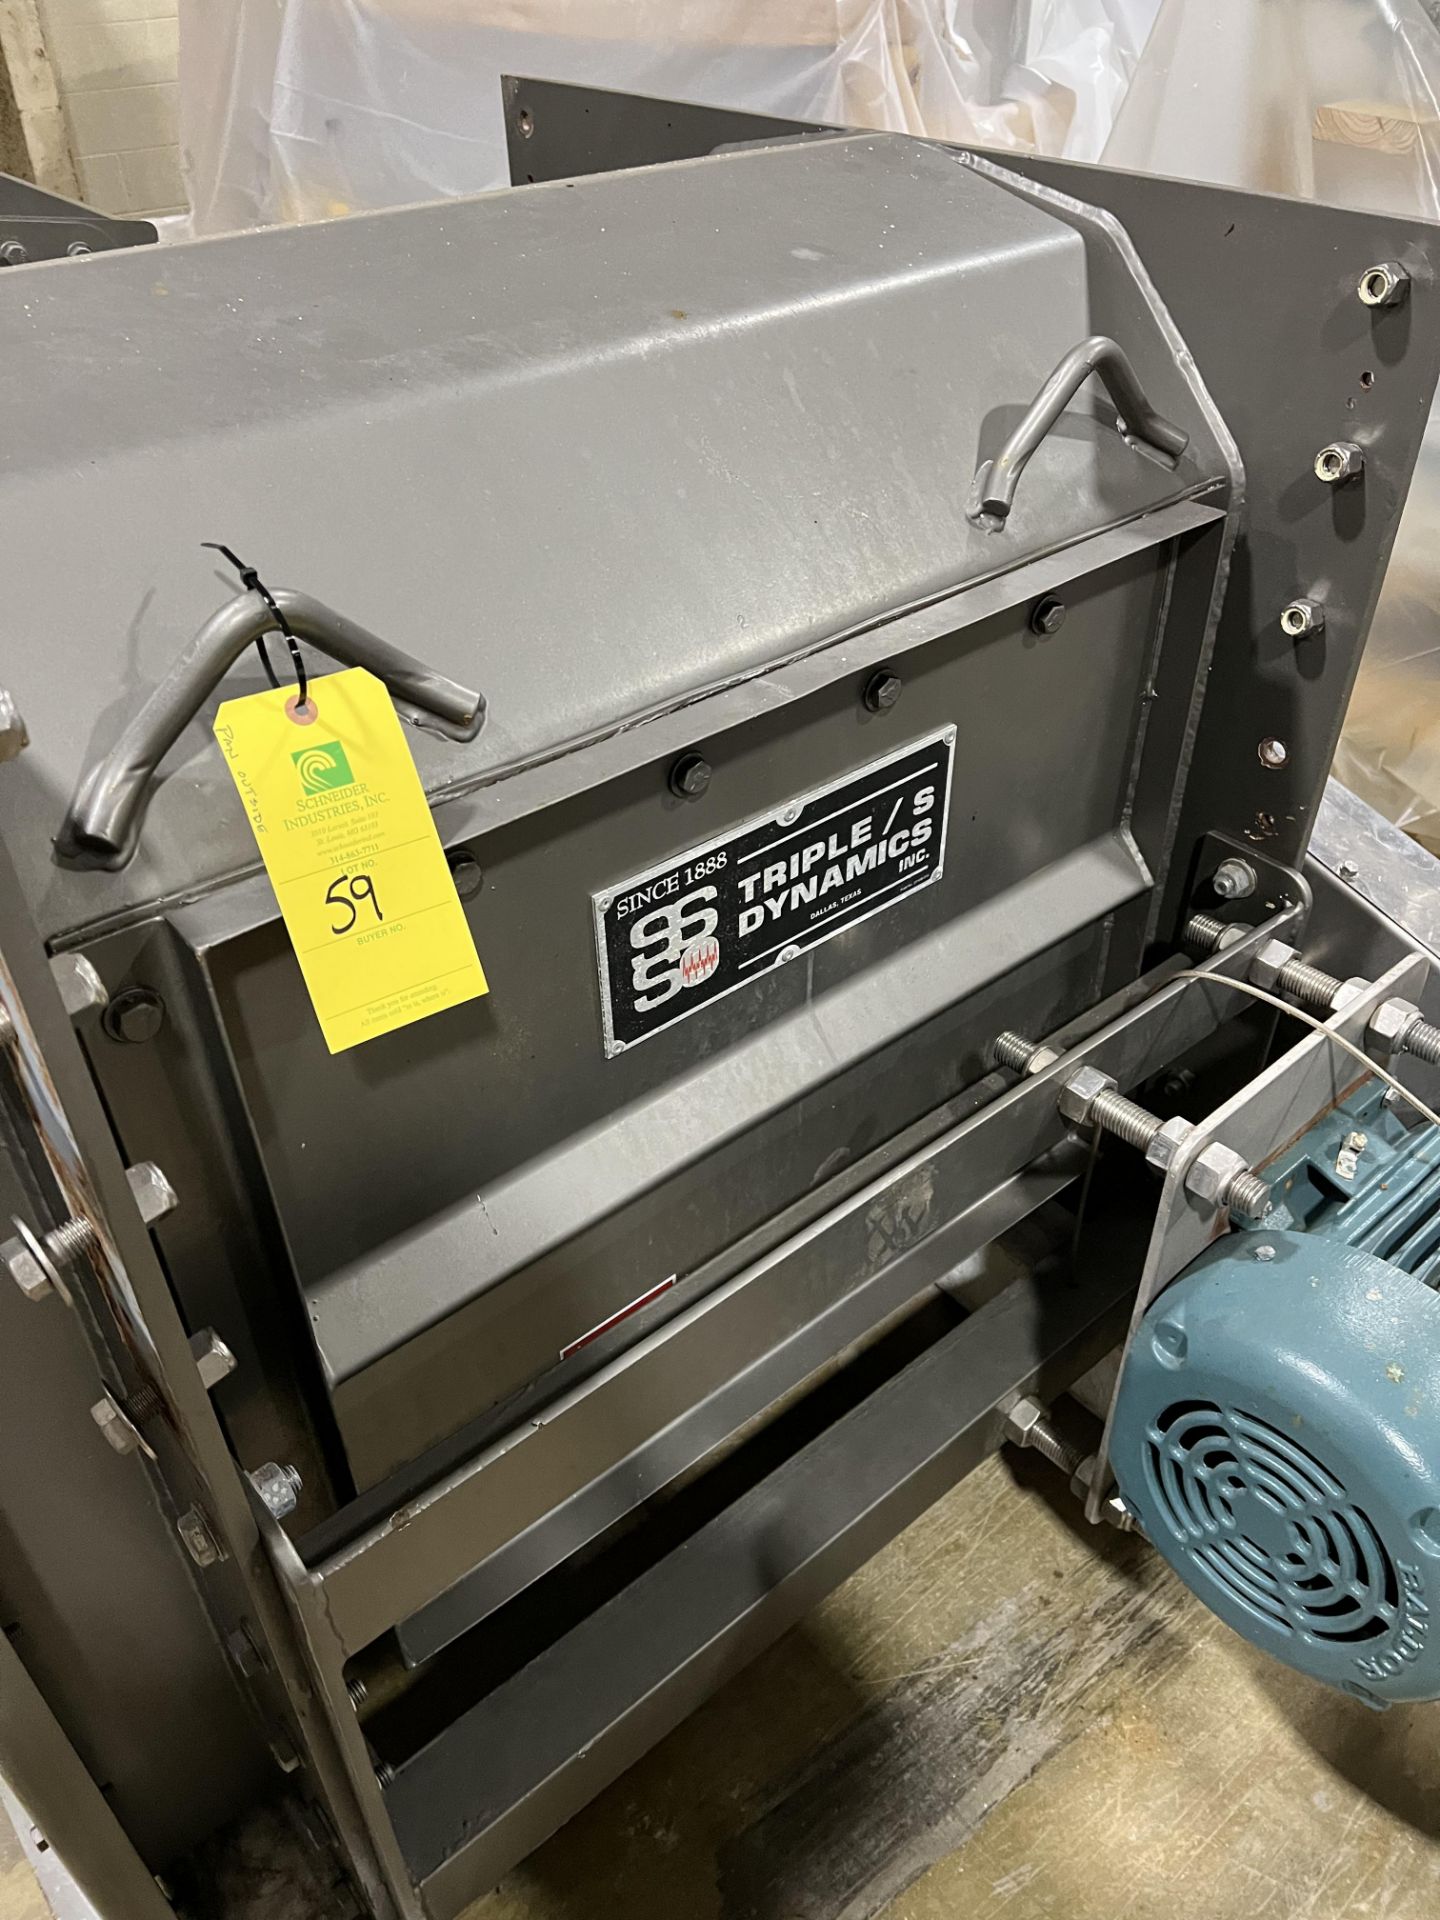 Triple S Slipstick Conveyor And Drive Model HDC10 3 LH, Rigging/Loading Fee: $225 - Image 3 of 8